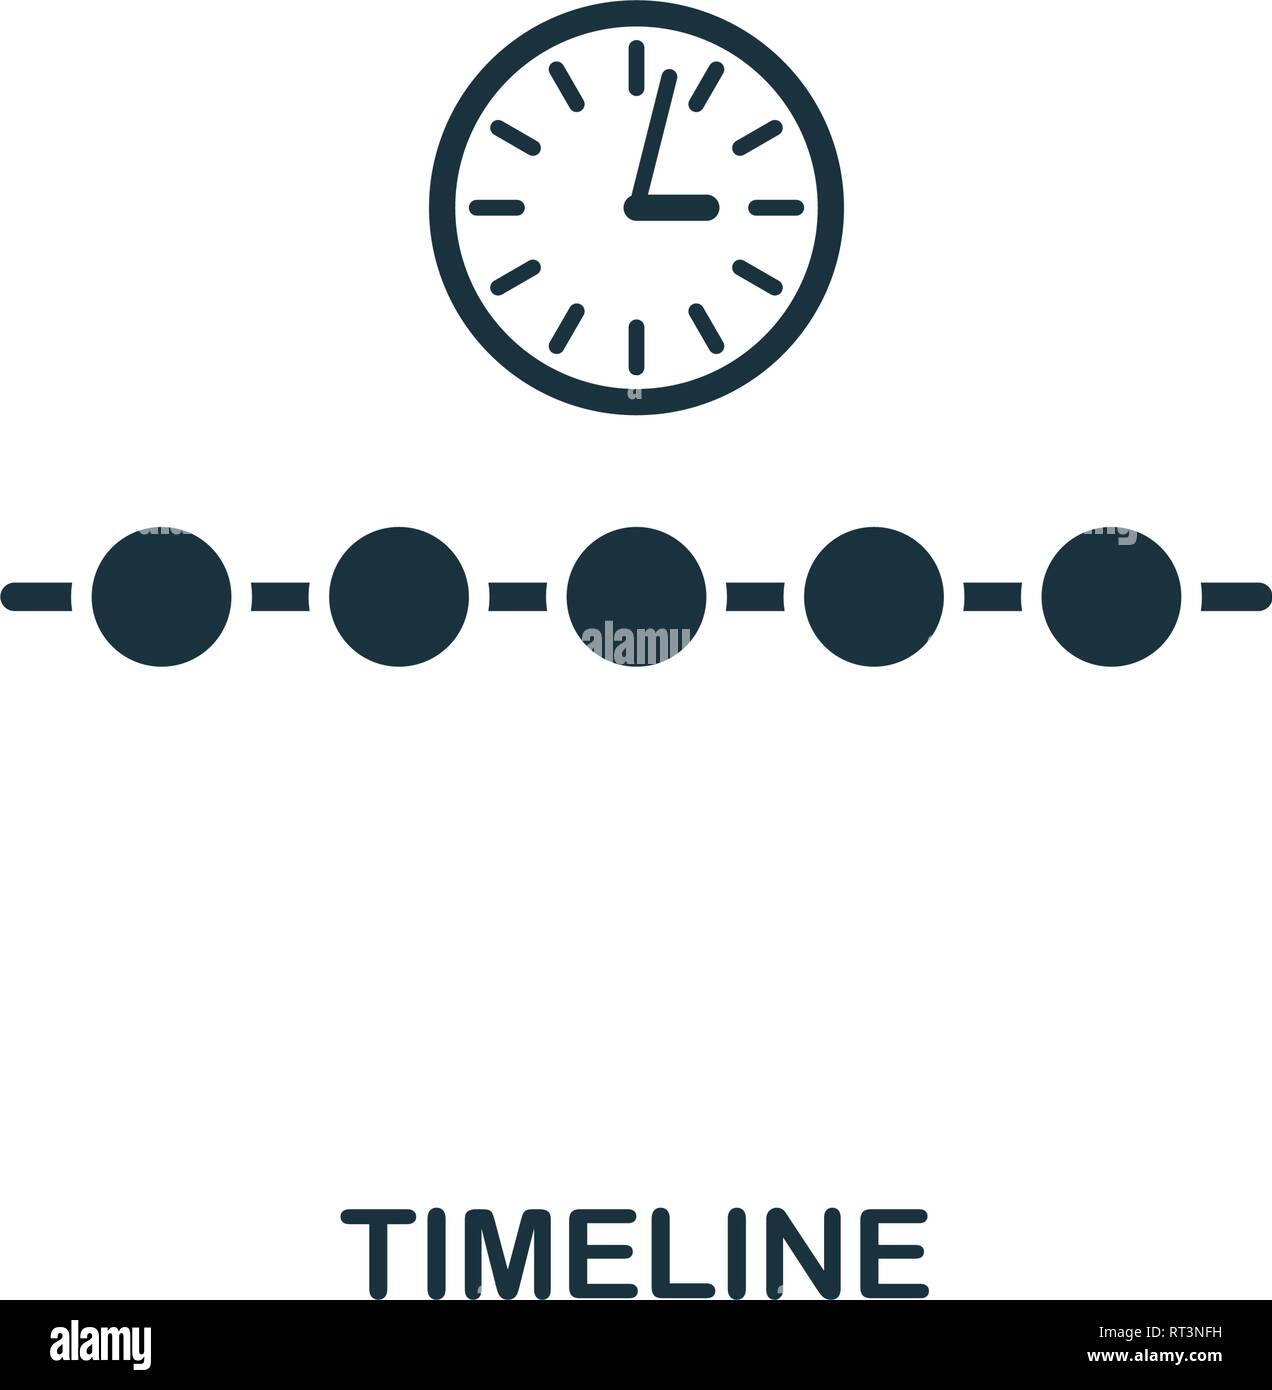 Timeline icon. Creative element design from fintech technology